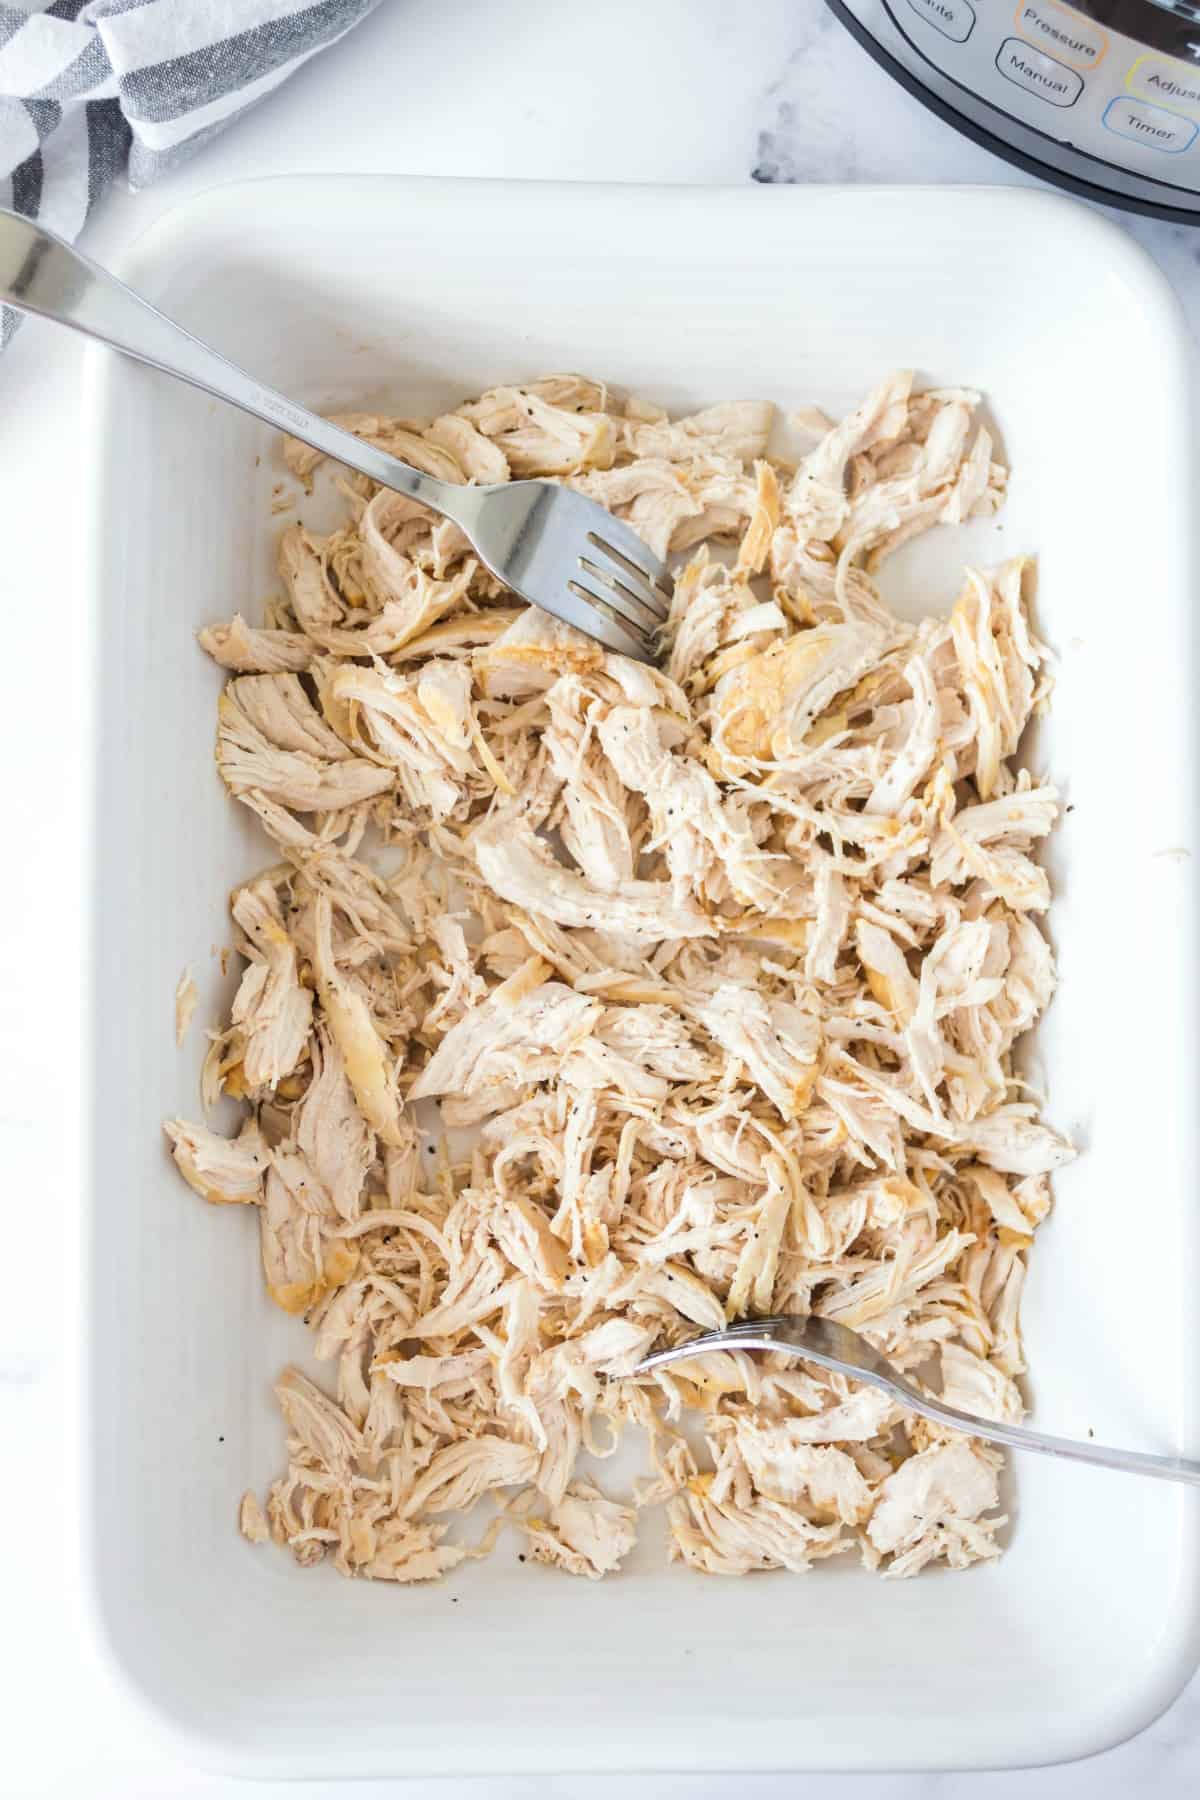 Shredded chicken in a white baking dish with fork.